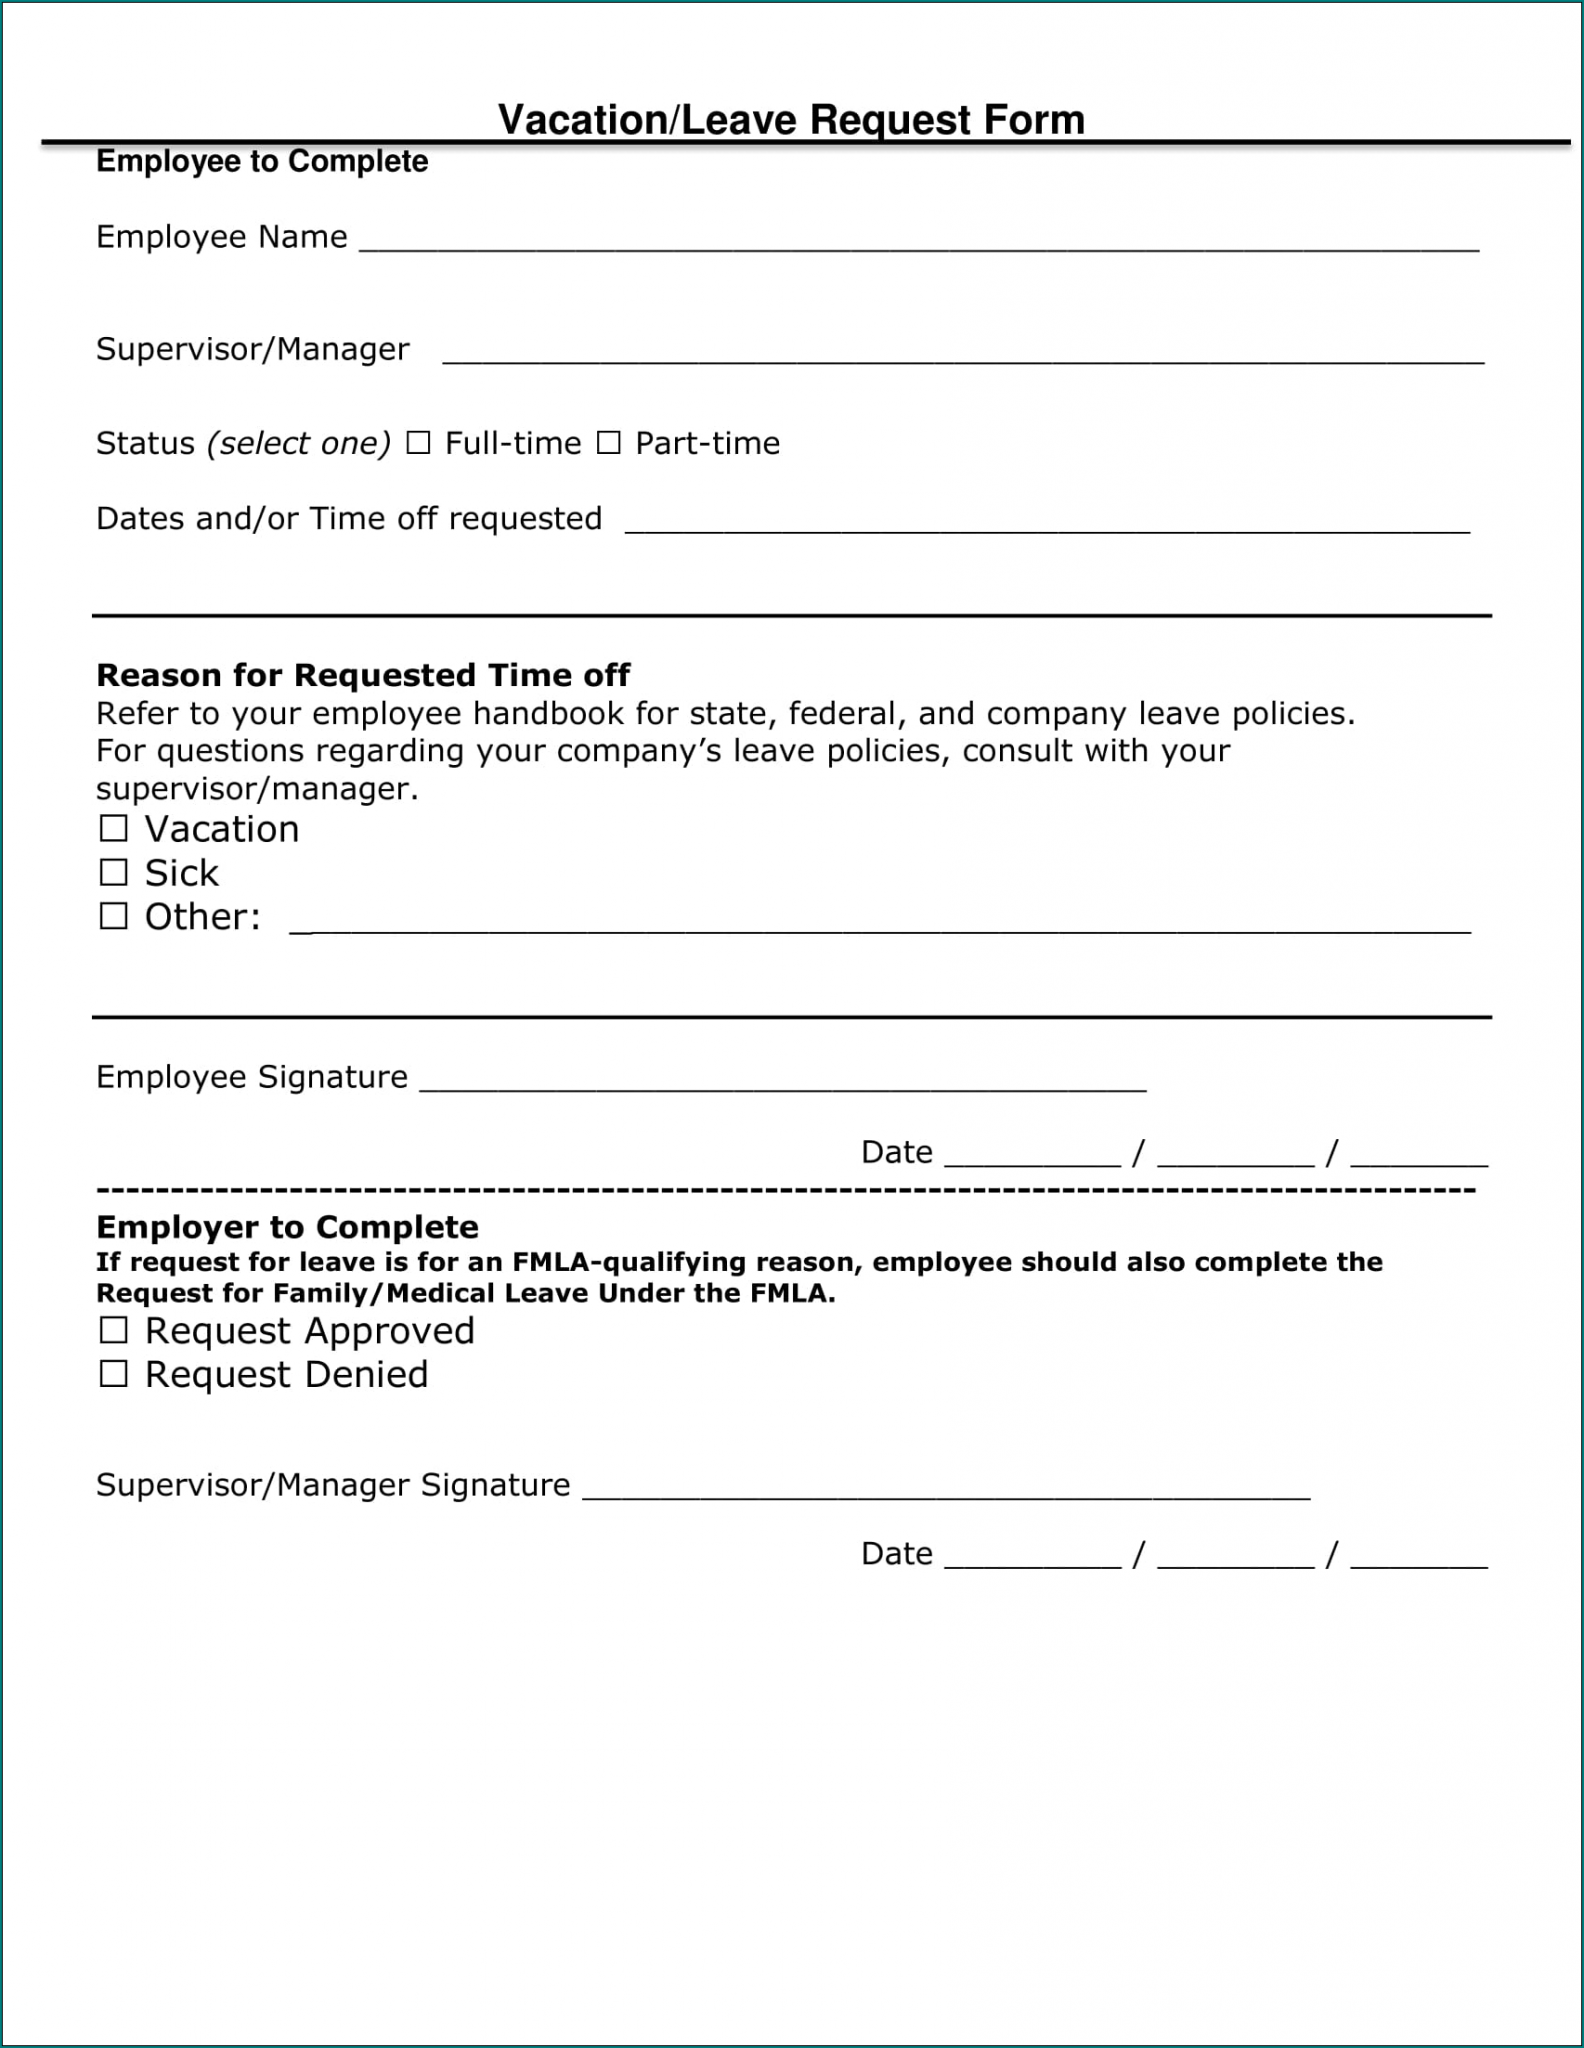 Sample Of Vacation Request Form Bogiolo